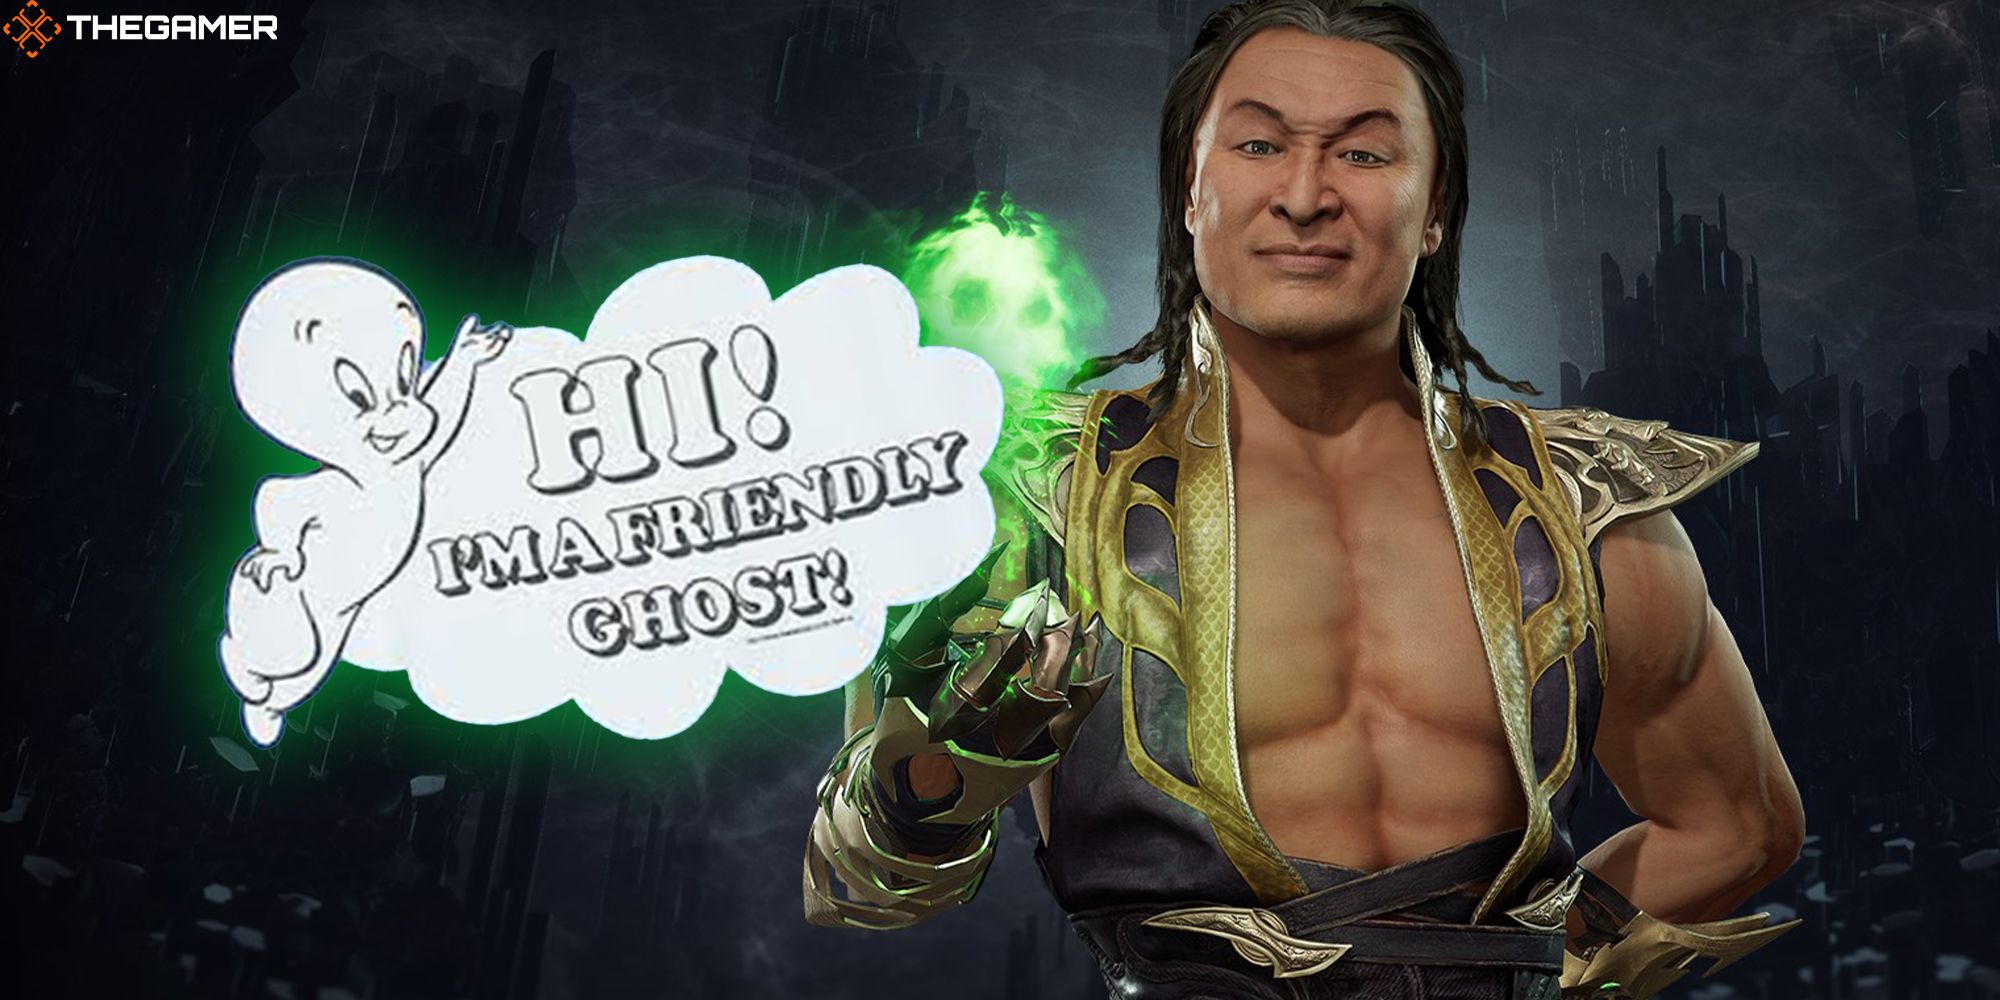 Shang Tsung summons Casper the Friendly Ghost as a holiday gift. Custom image for TG.